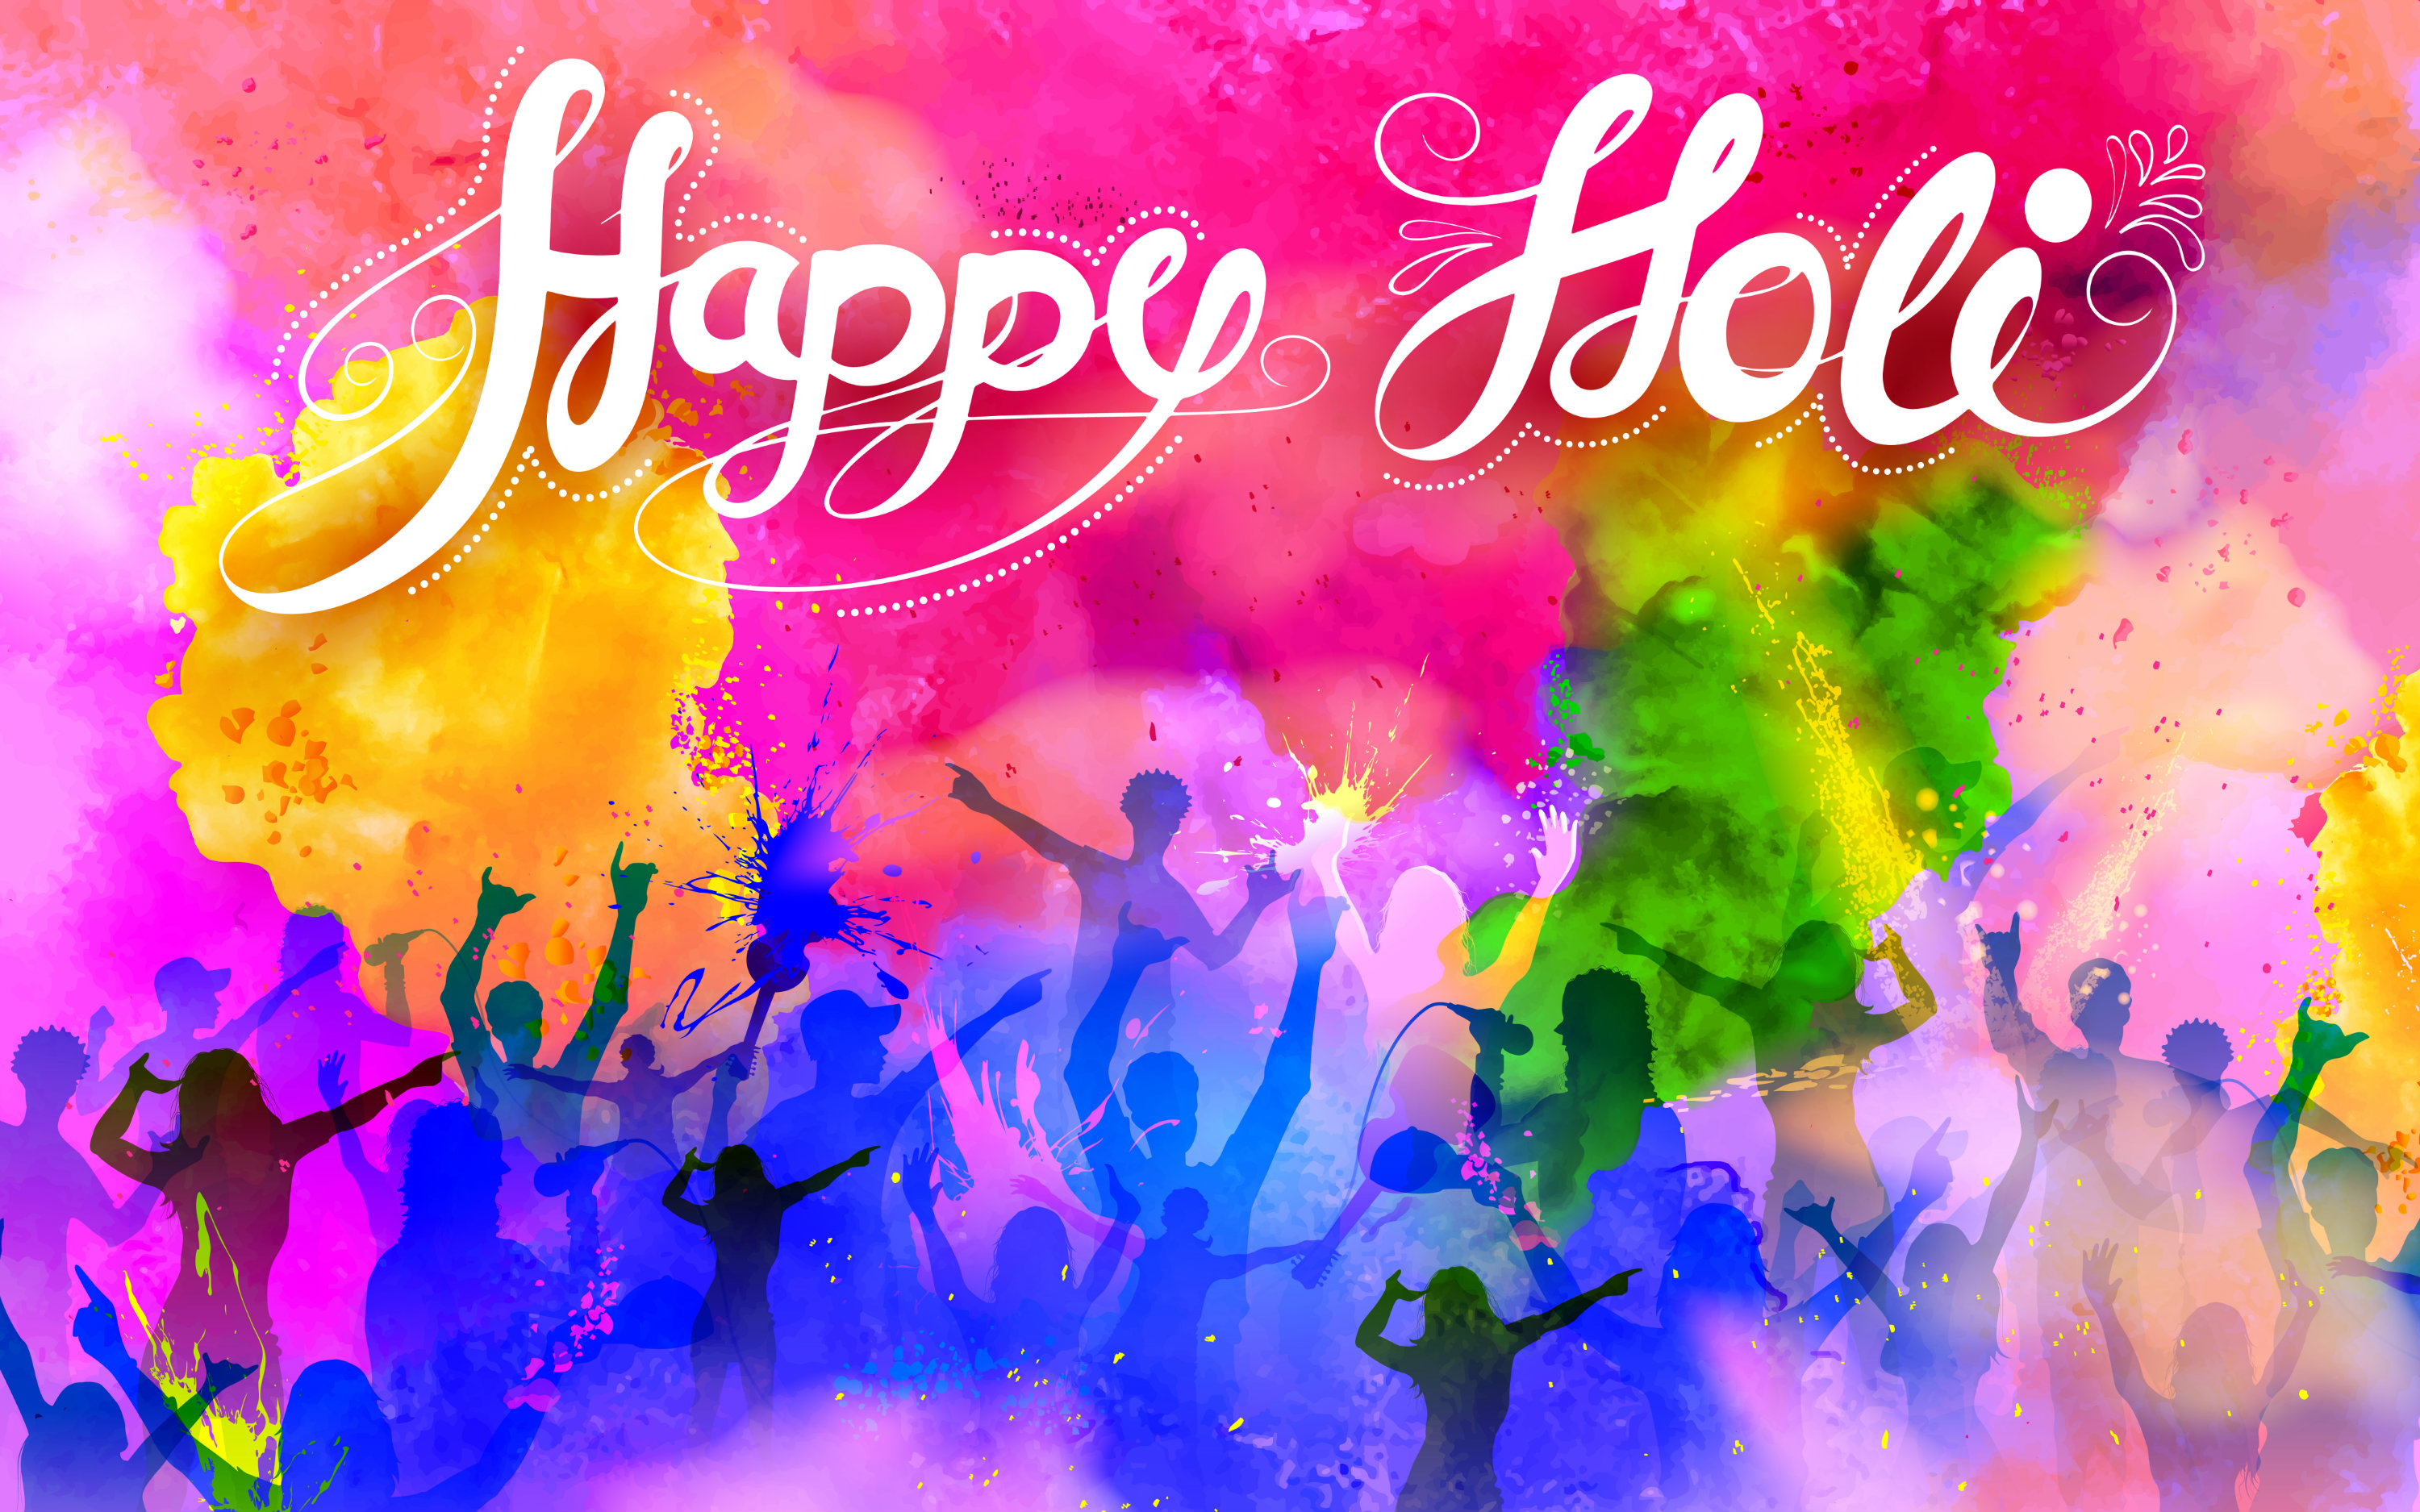 Holi 2020 Wallpaers And Images Download Free Hd Wallpapers Of Holi